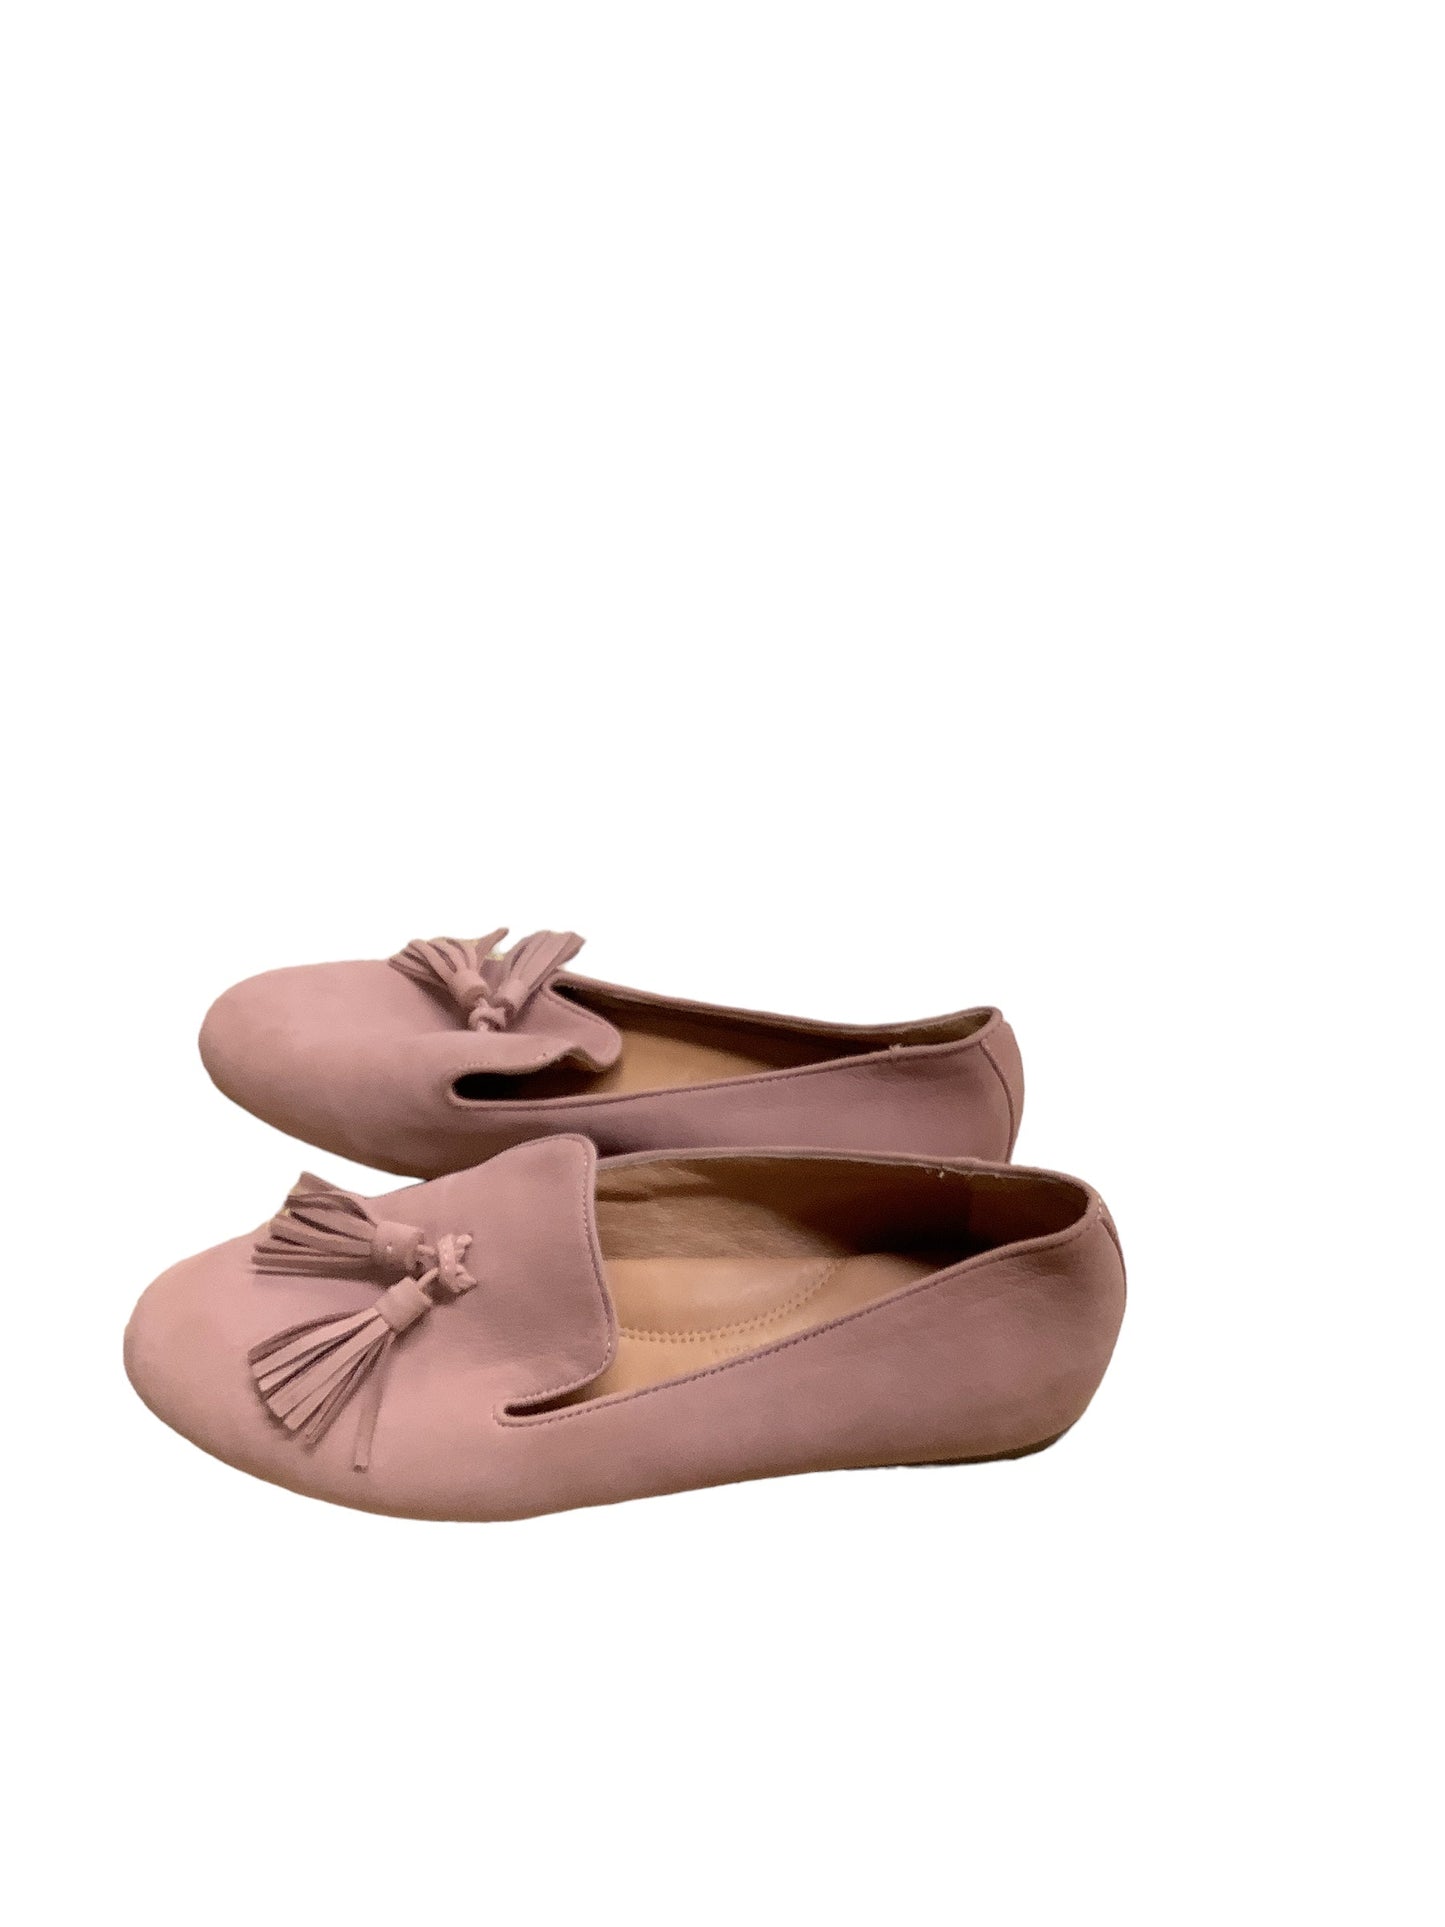 Shoes Flats By Gentle Souls  Size: 8